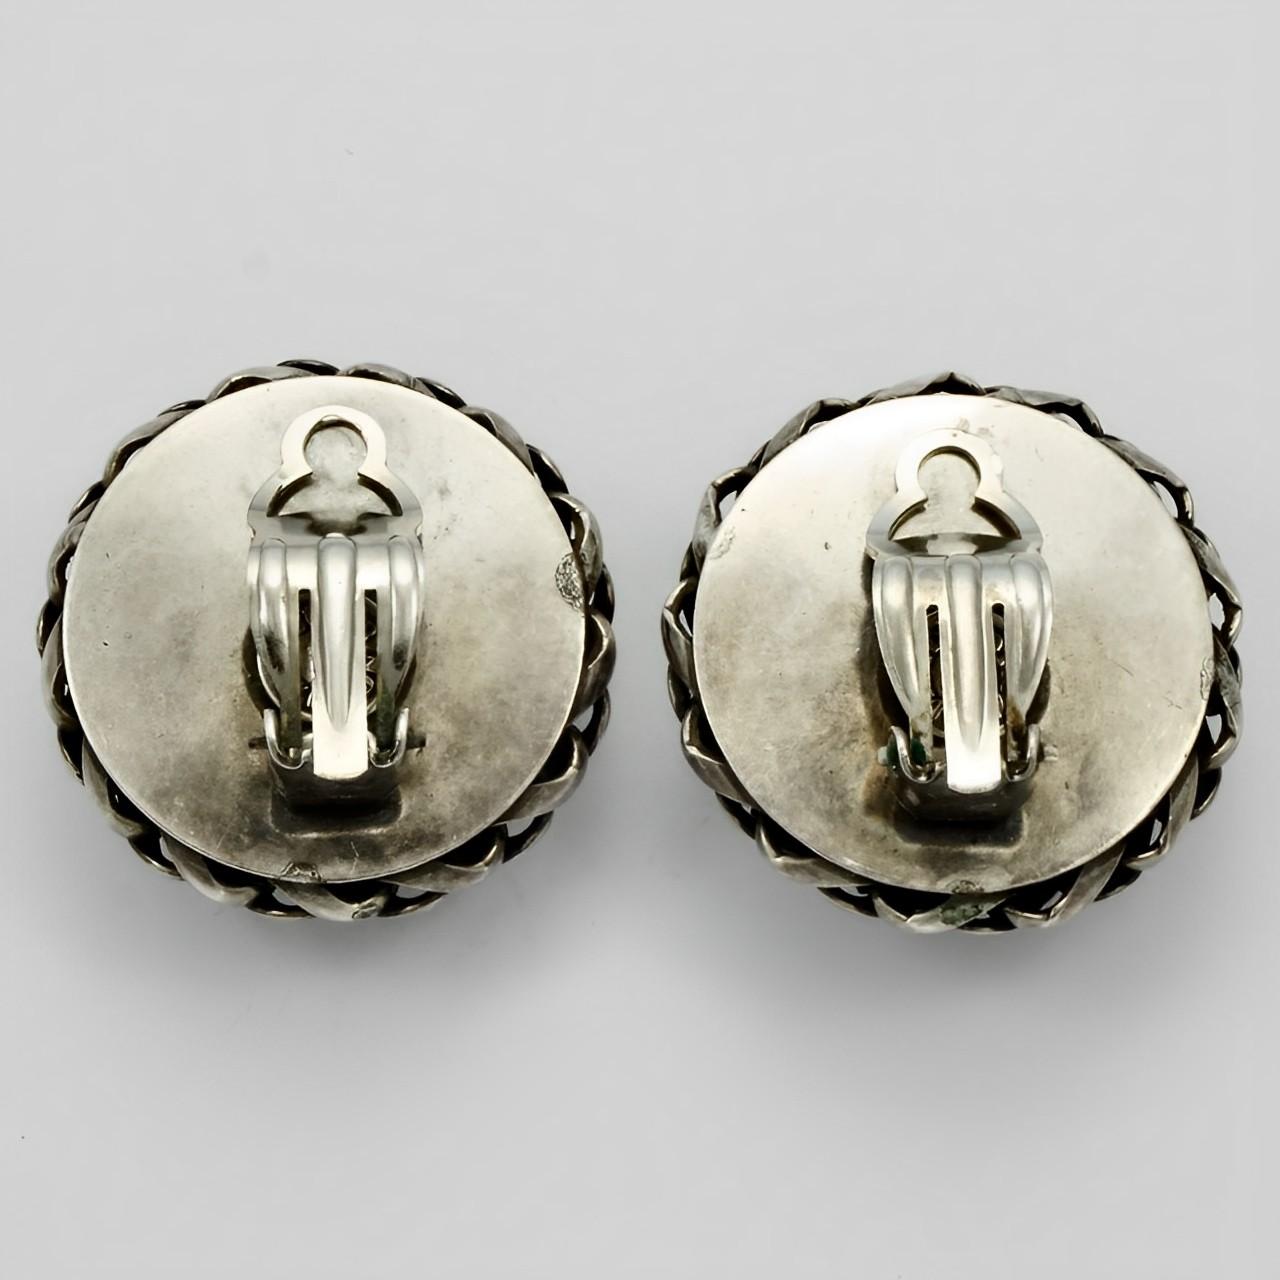 Wonderful Butler & Wilson silver tone earrings featuring a domed centre with mesh and twist edging. Measuring diameter 3.1 cm / 1.2 inches.

This is a lovely pair of ornate earrings, by London designers Butler & Wilson. Circa 1980s.

Nicky Butler